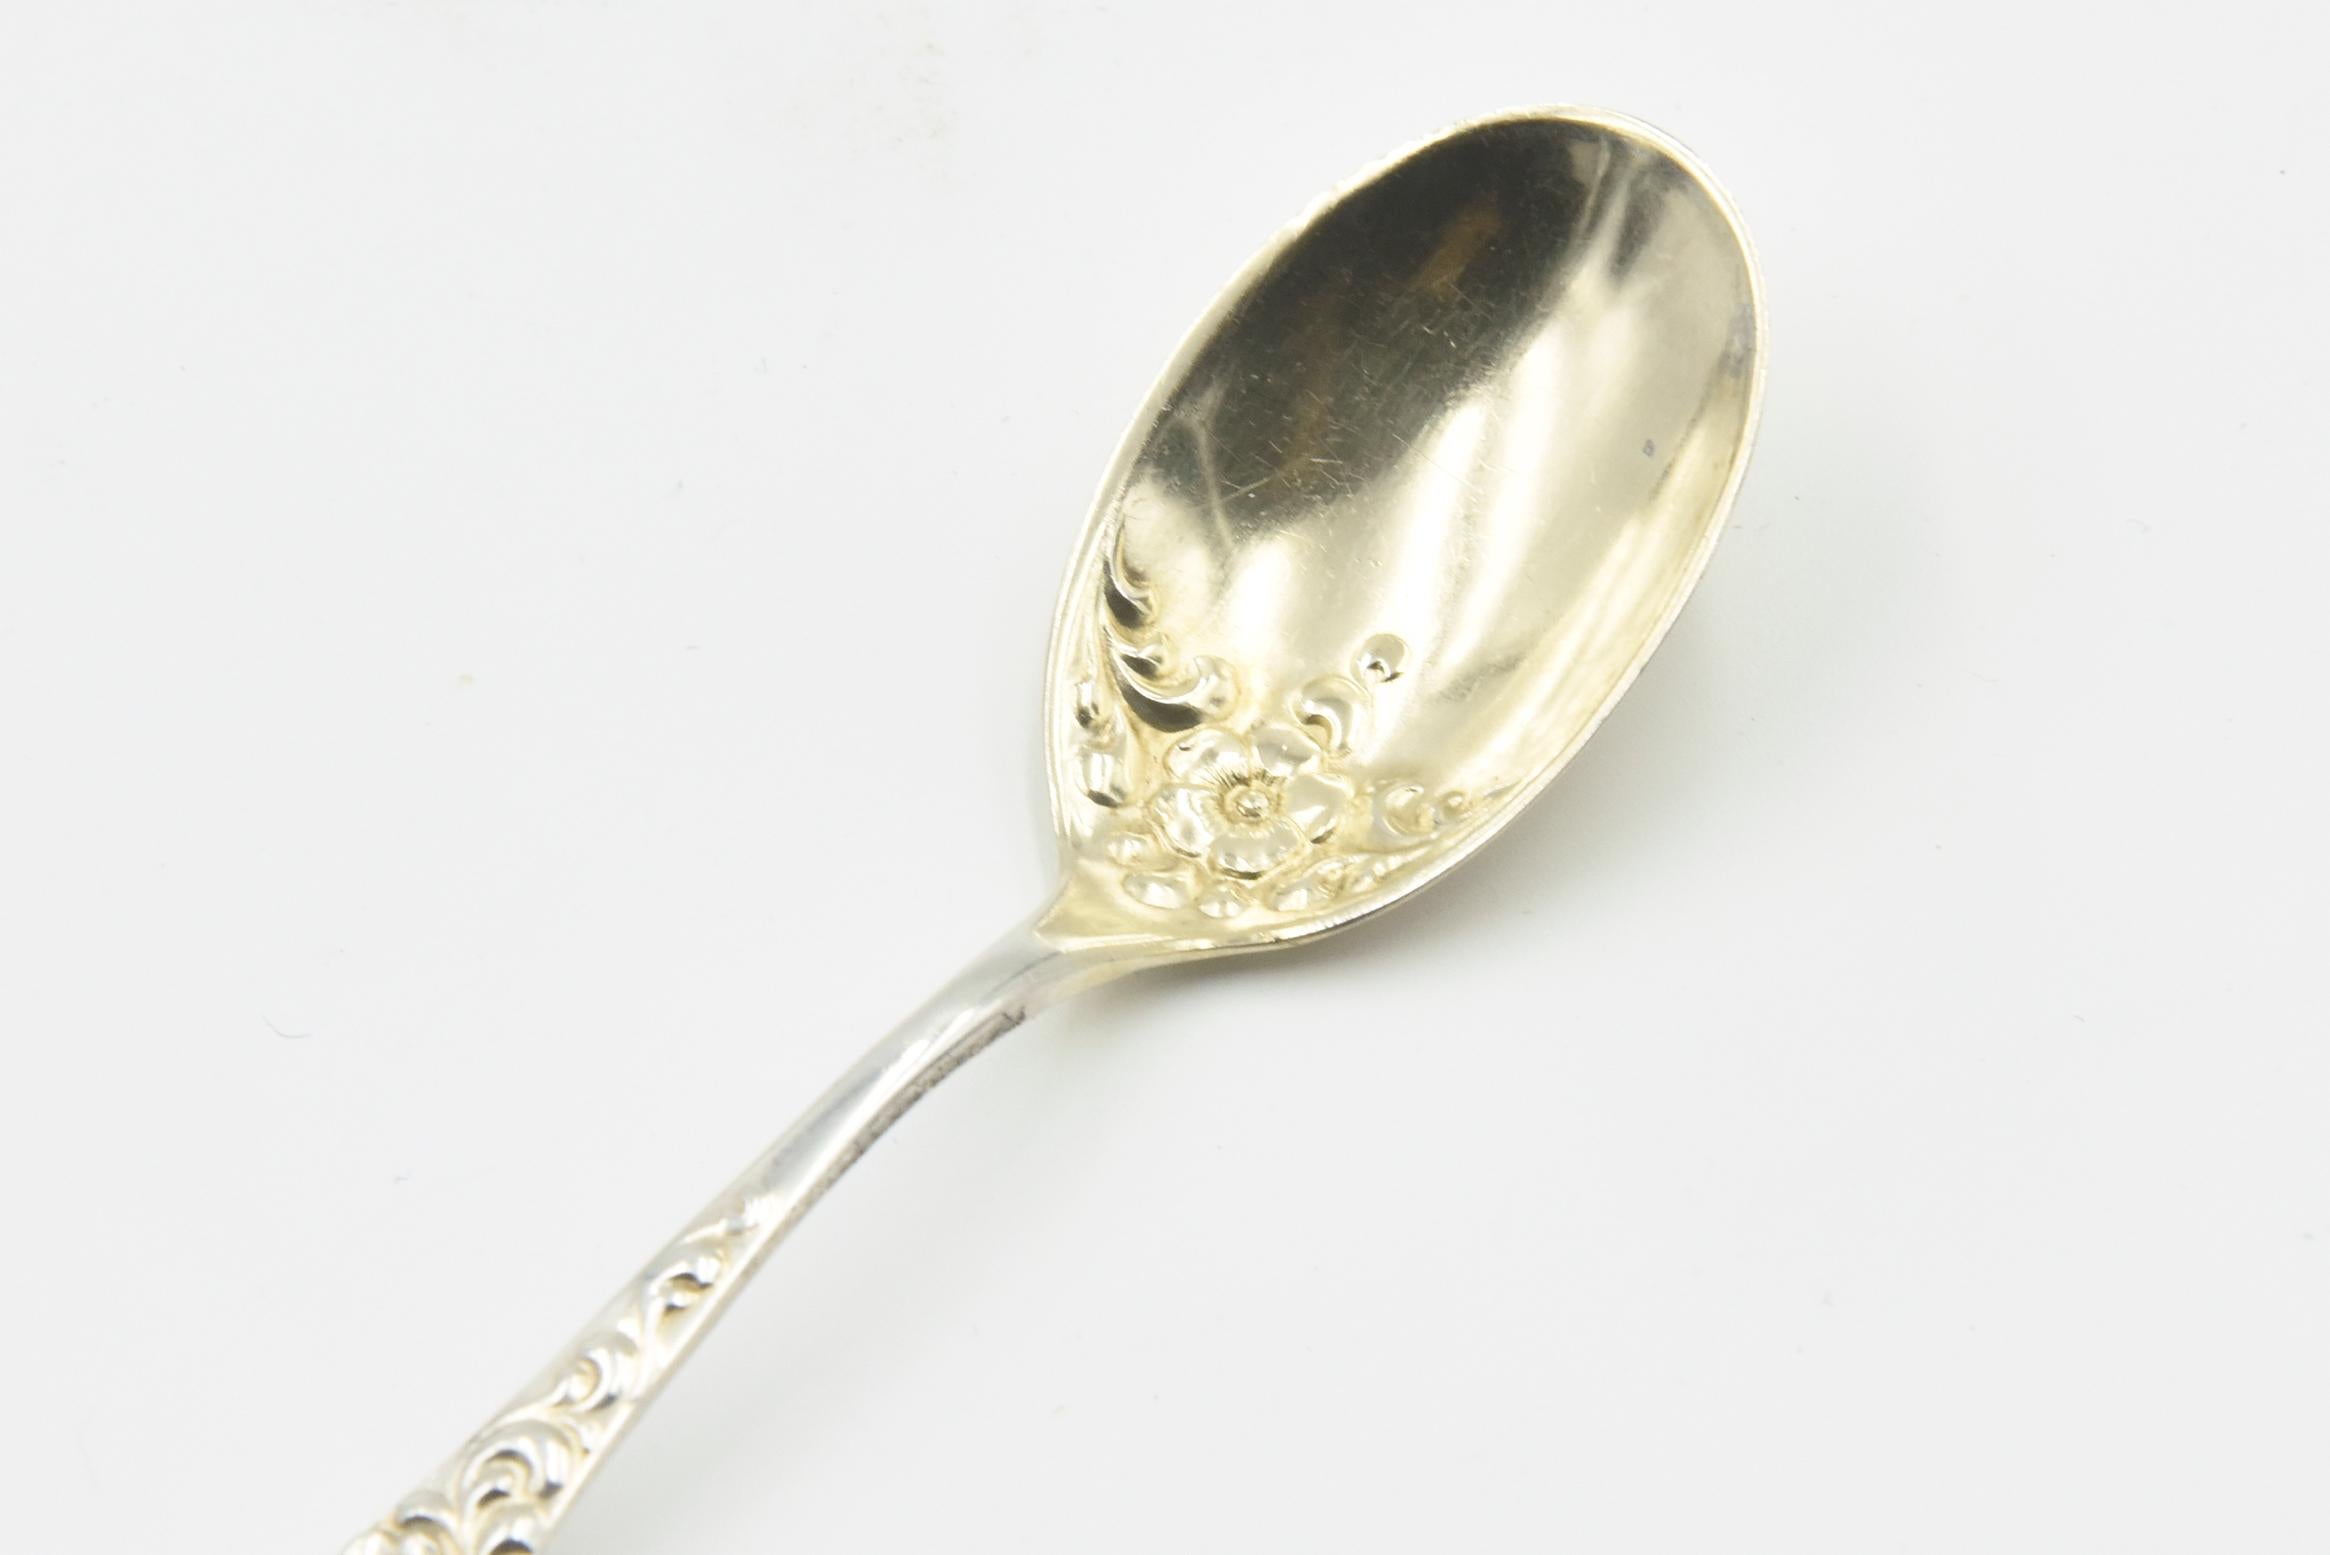 1888 Sterling Rococo Demitasse Spoons Crowell Bailey Banks & Biddle, Set of 11 In Good Condition For Sale In Miami Beach, FL